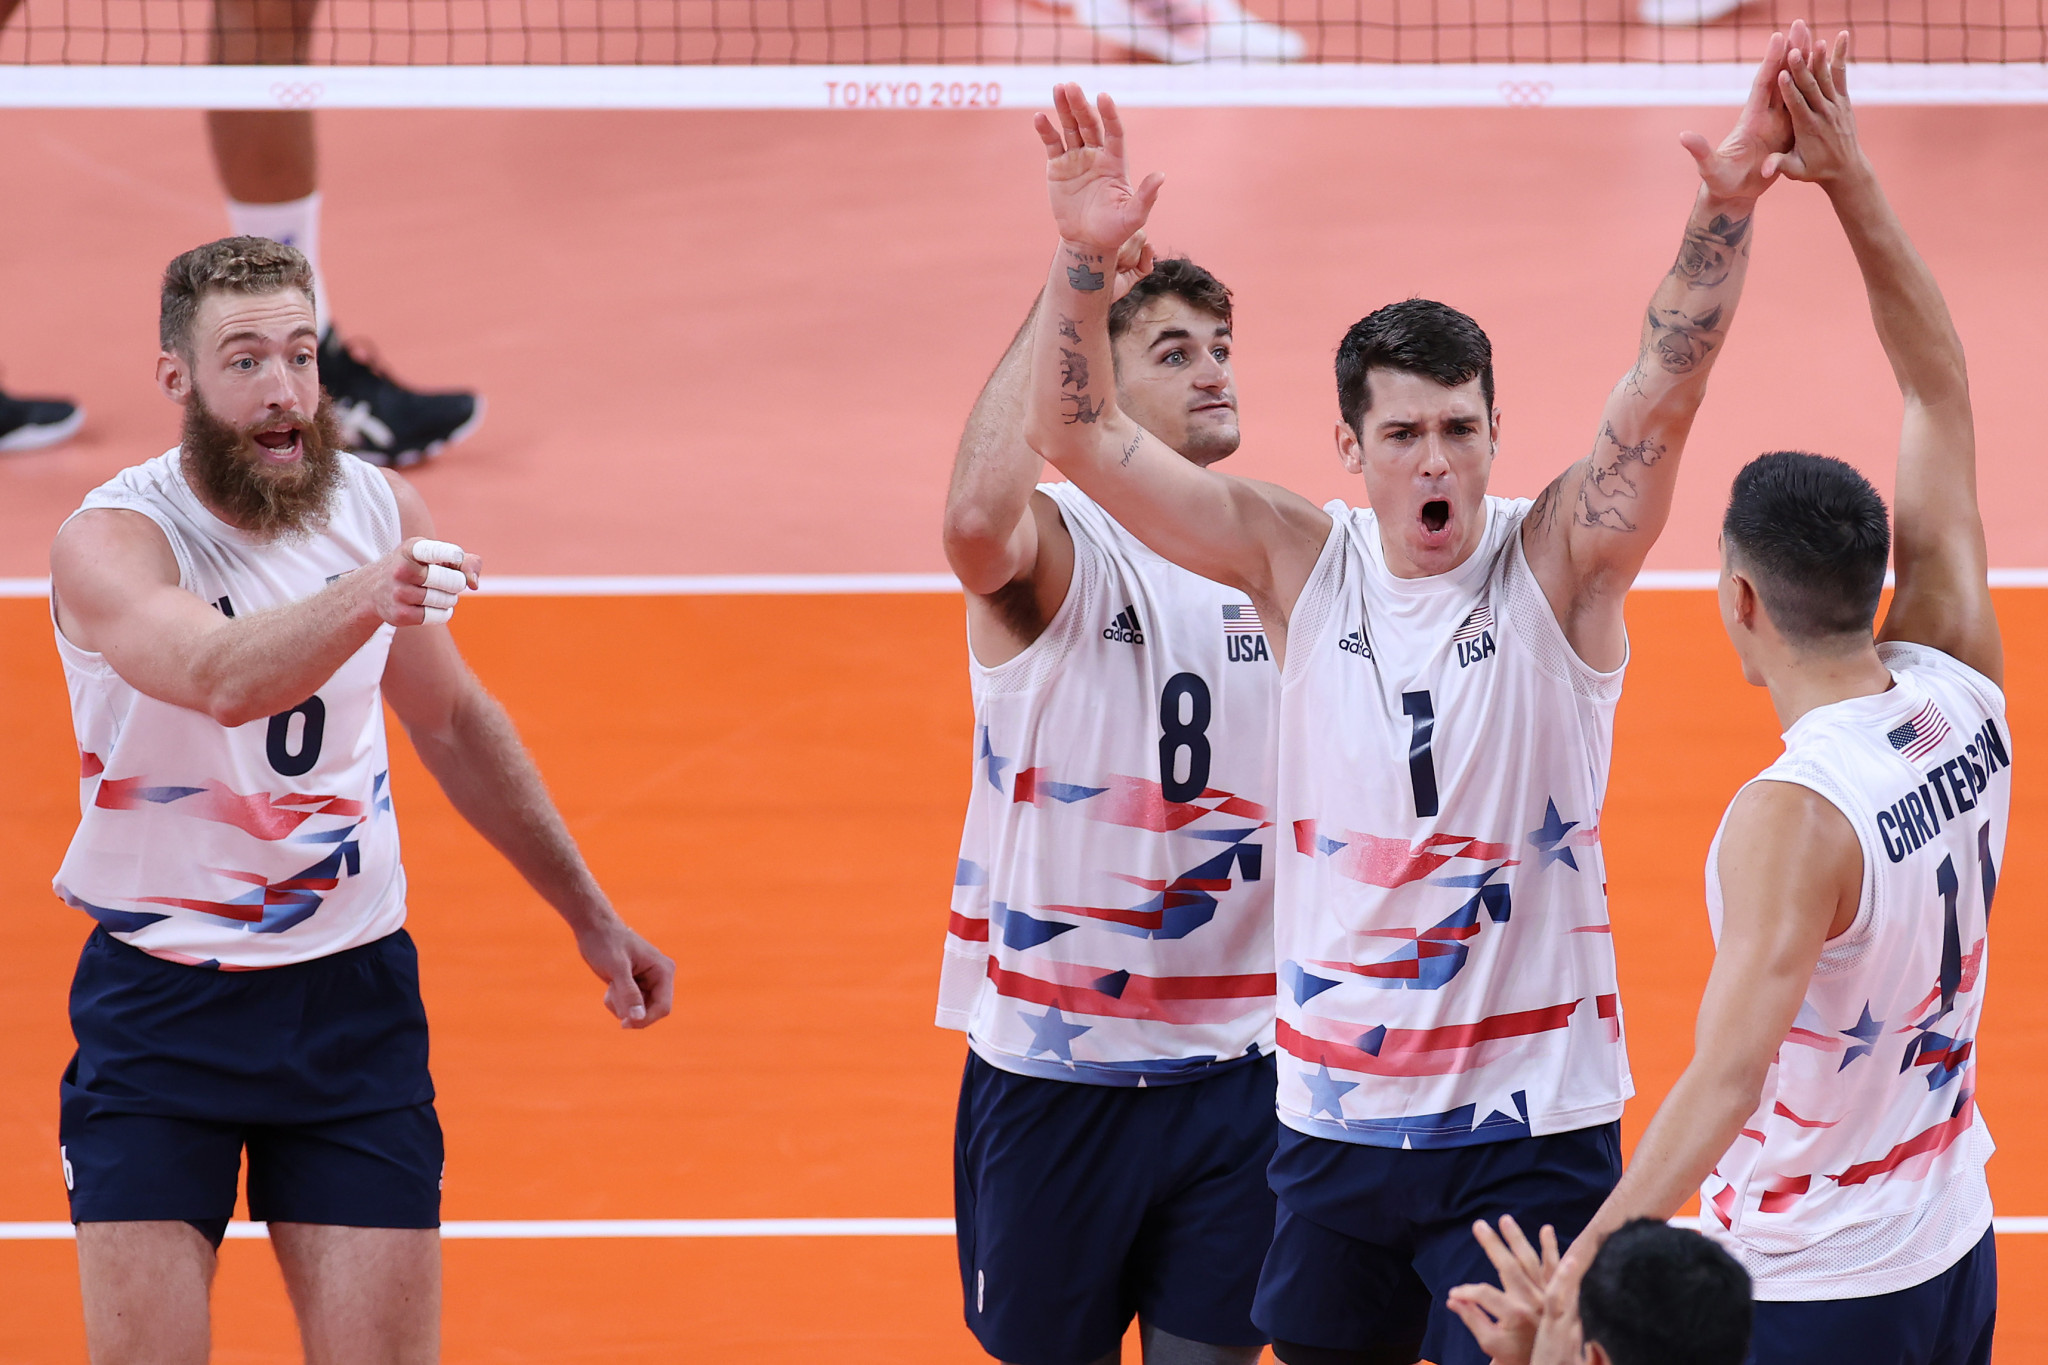 Main contenders US and Poland win again at Volleyball Men's World Championship